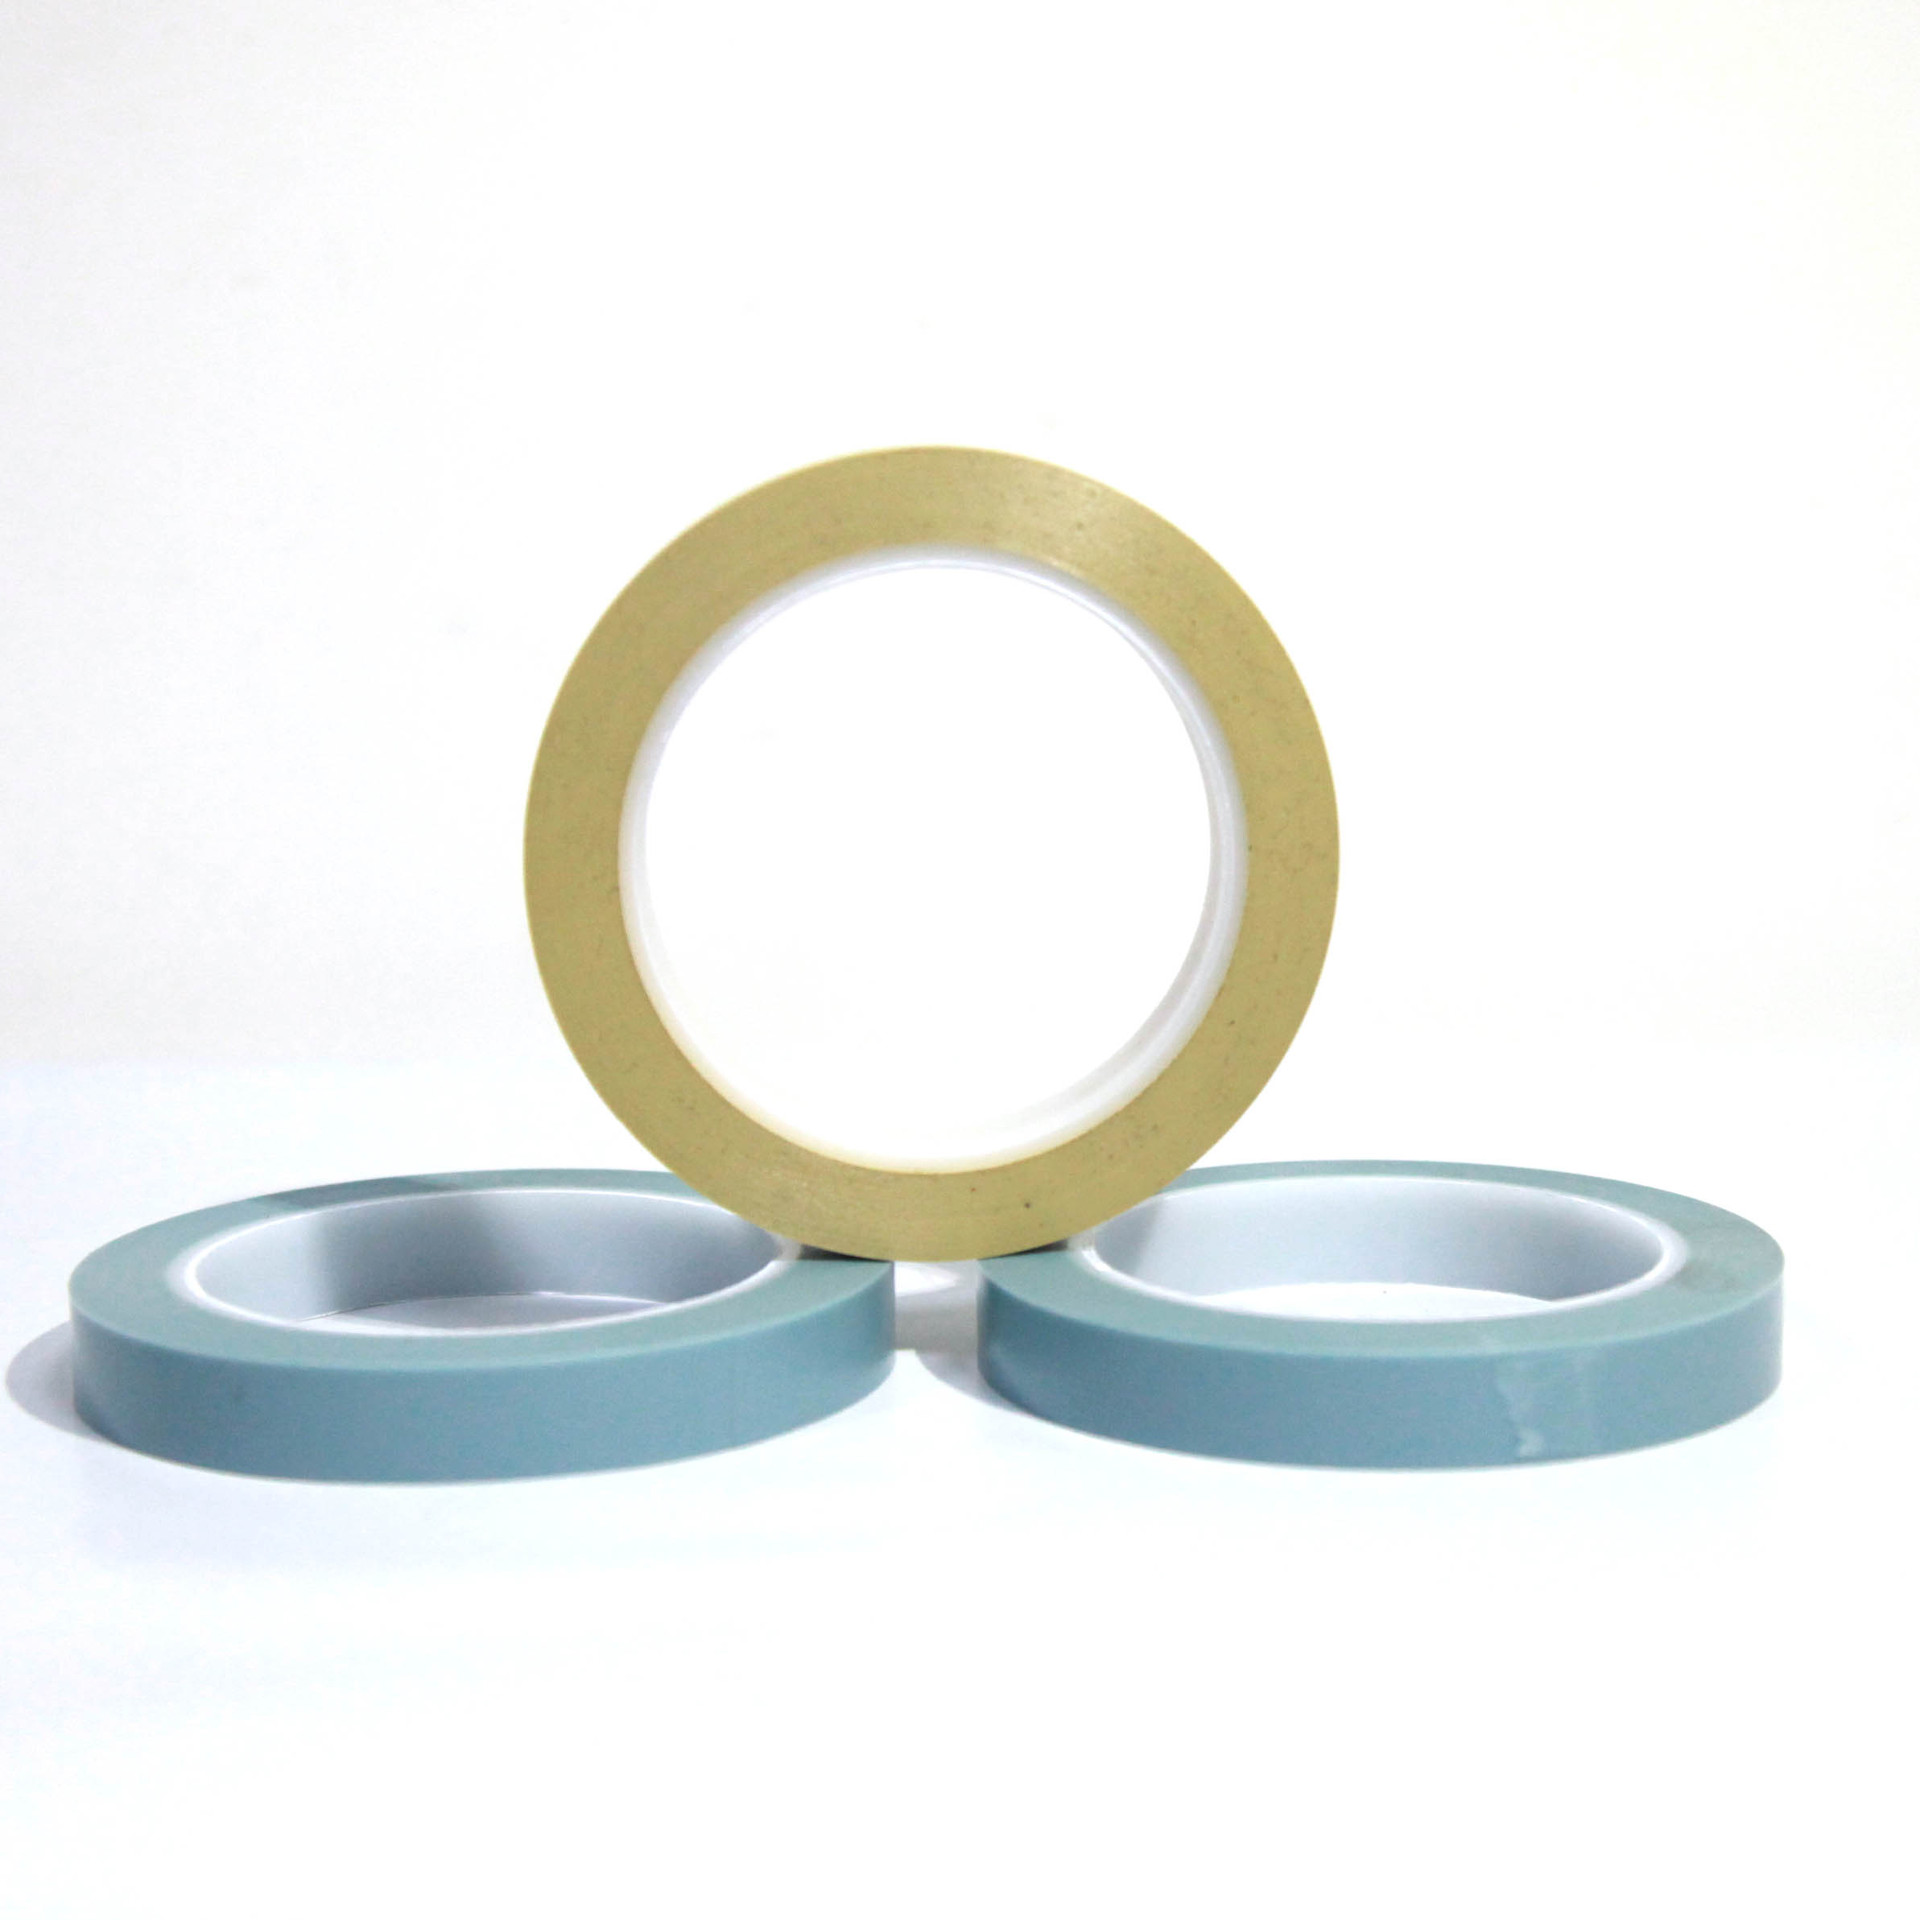 High temperature resistant color separation tape special masking film for a